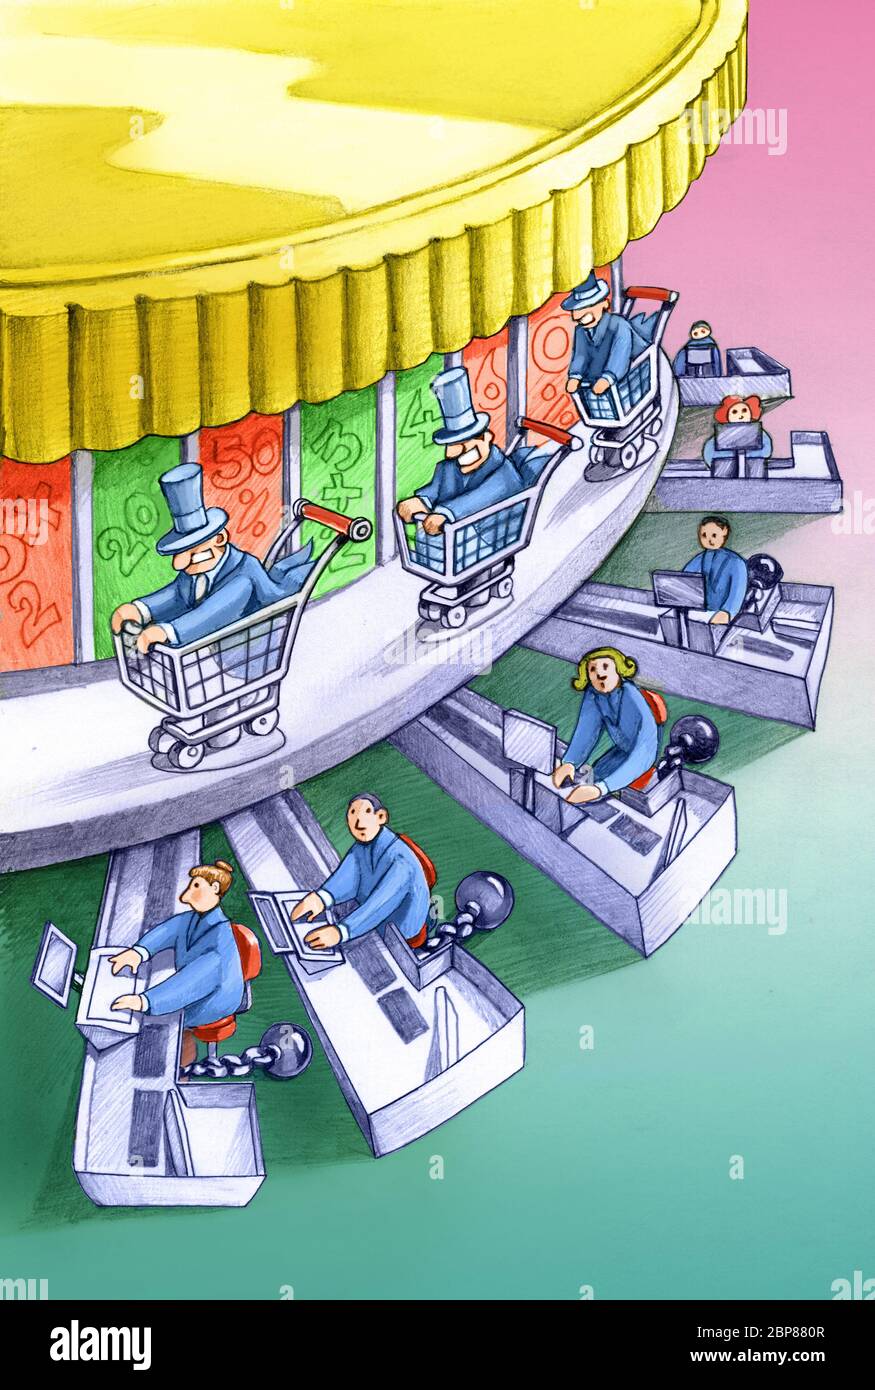 carousel with rich people riding shopping carts is spun by cash workers chained to the crates Stock Photo